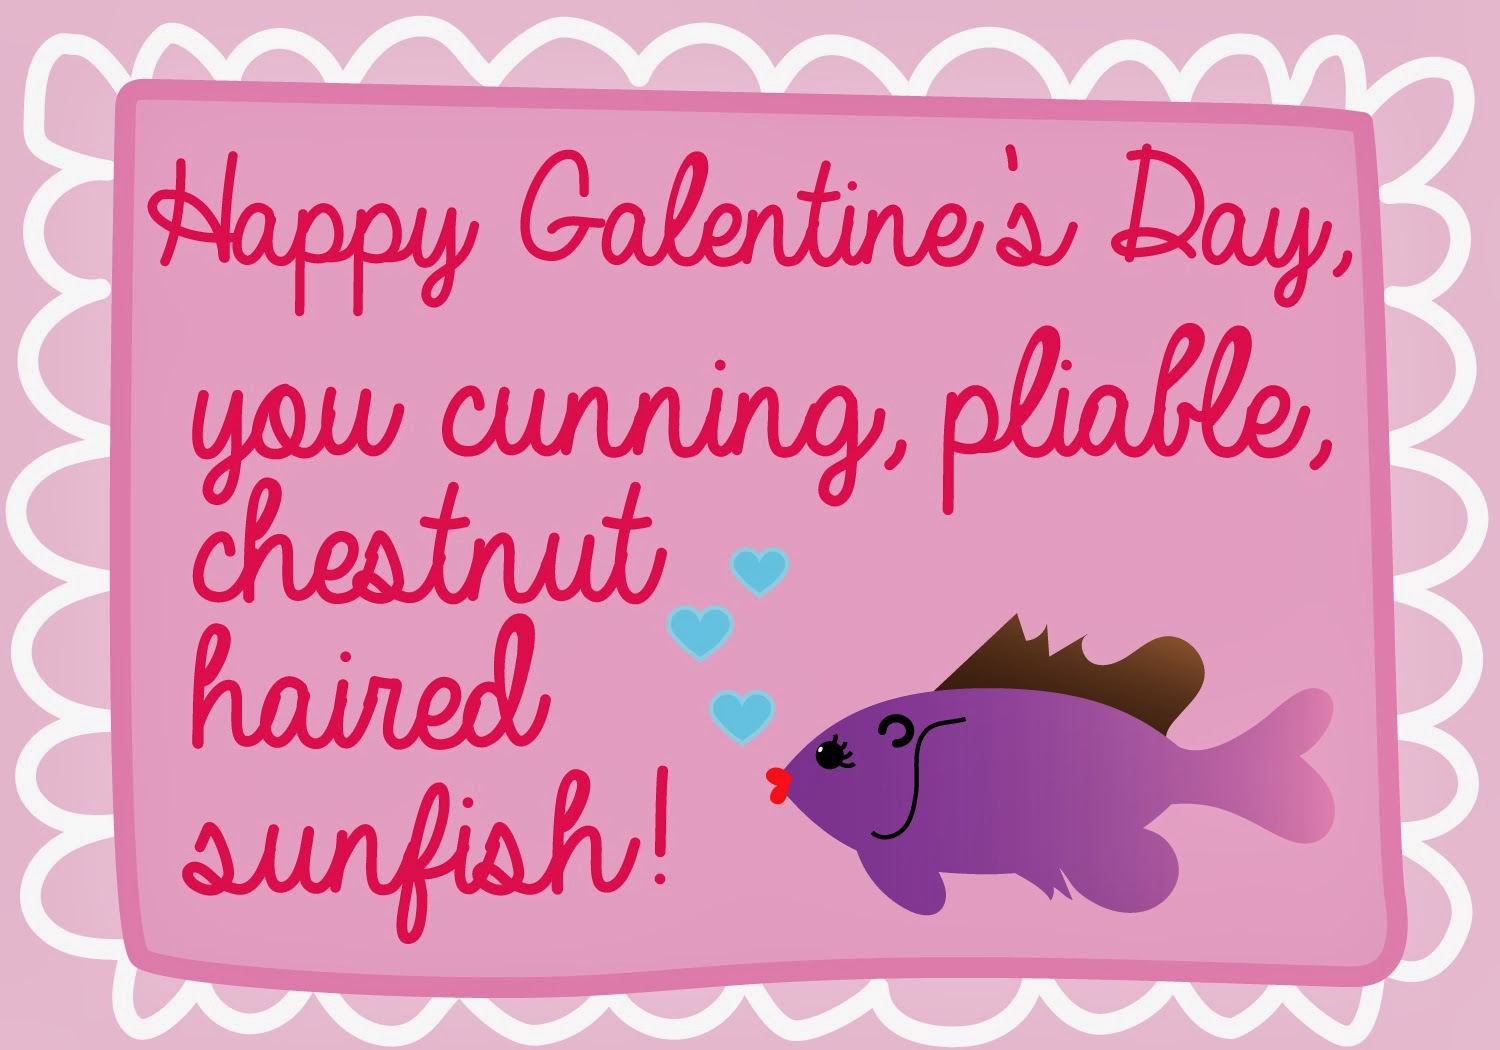 ... with Caitlin: Happy (belated) Galentine's Day!1500 x 1050